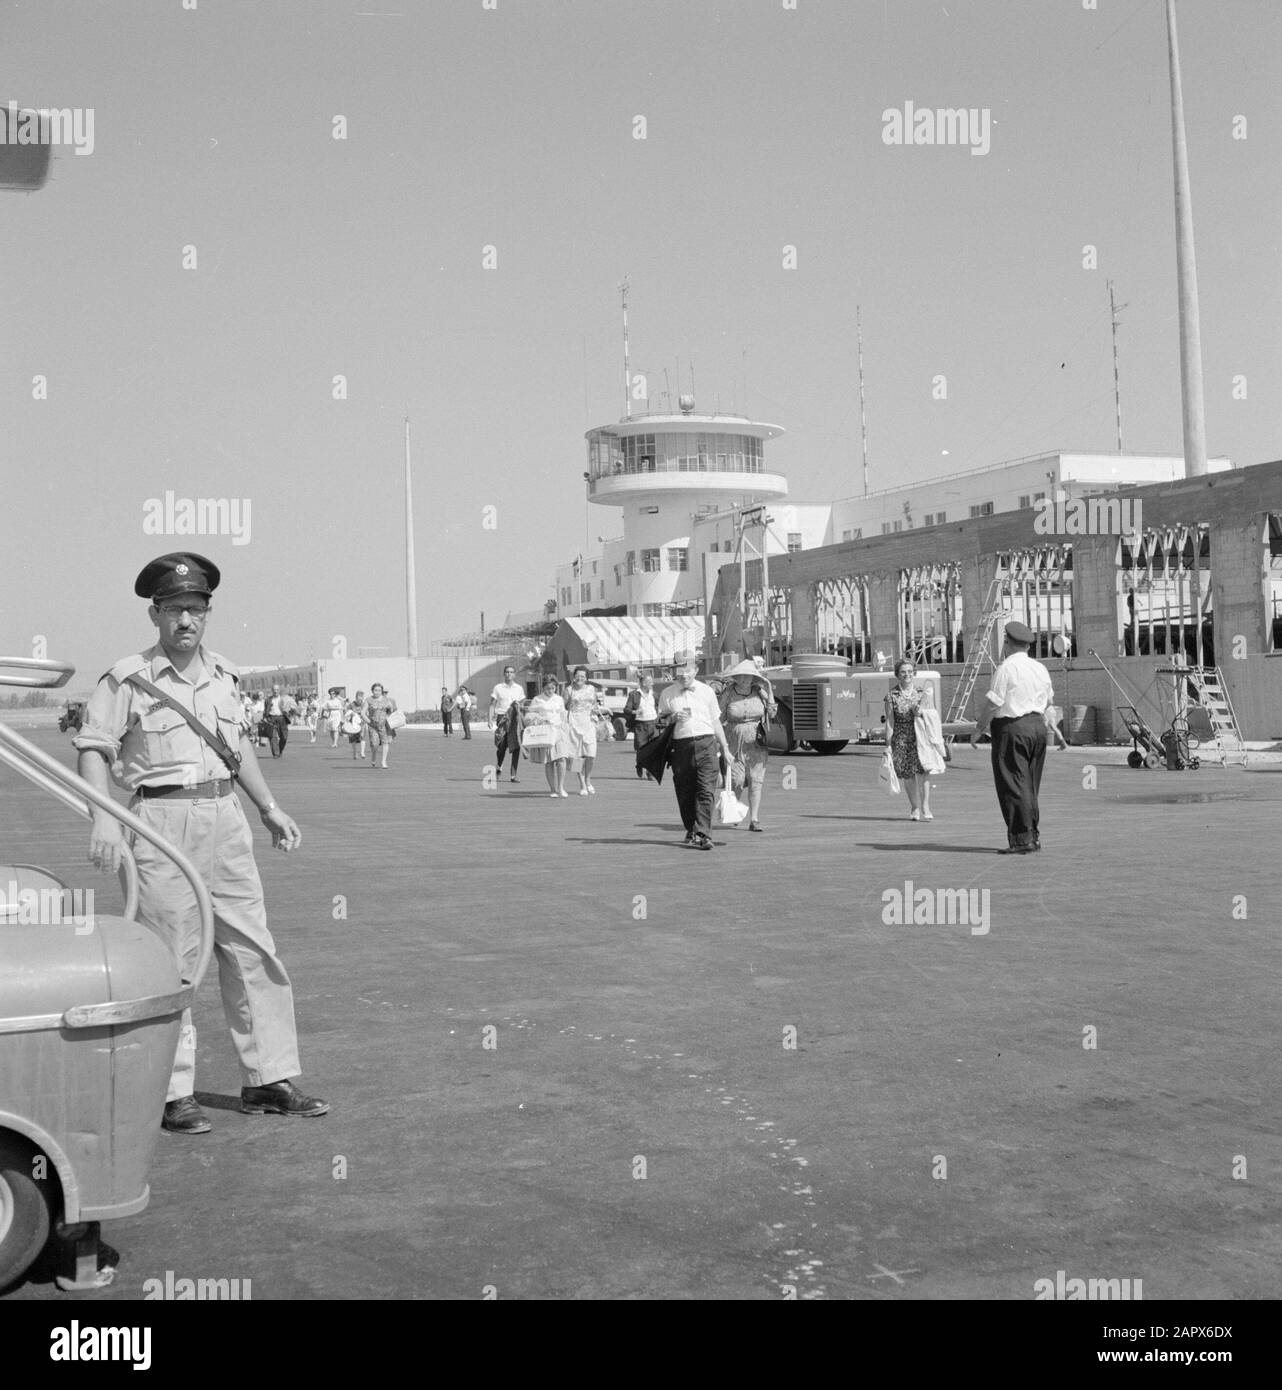 Israel: Lydda Airport (Lod)  Travelers at the airport with the control tower in the background Date: undated Location: Israel, Lod Airport, Lydda Airport Keywords: arrival and departure, aviation, travelers, control towers Stock Photo